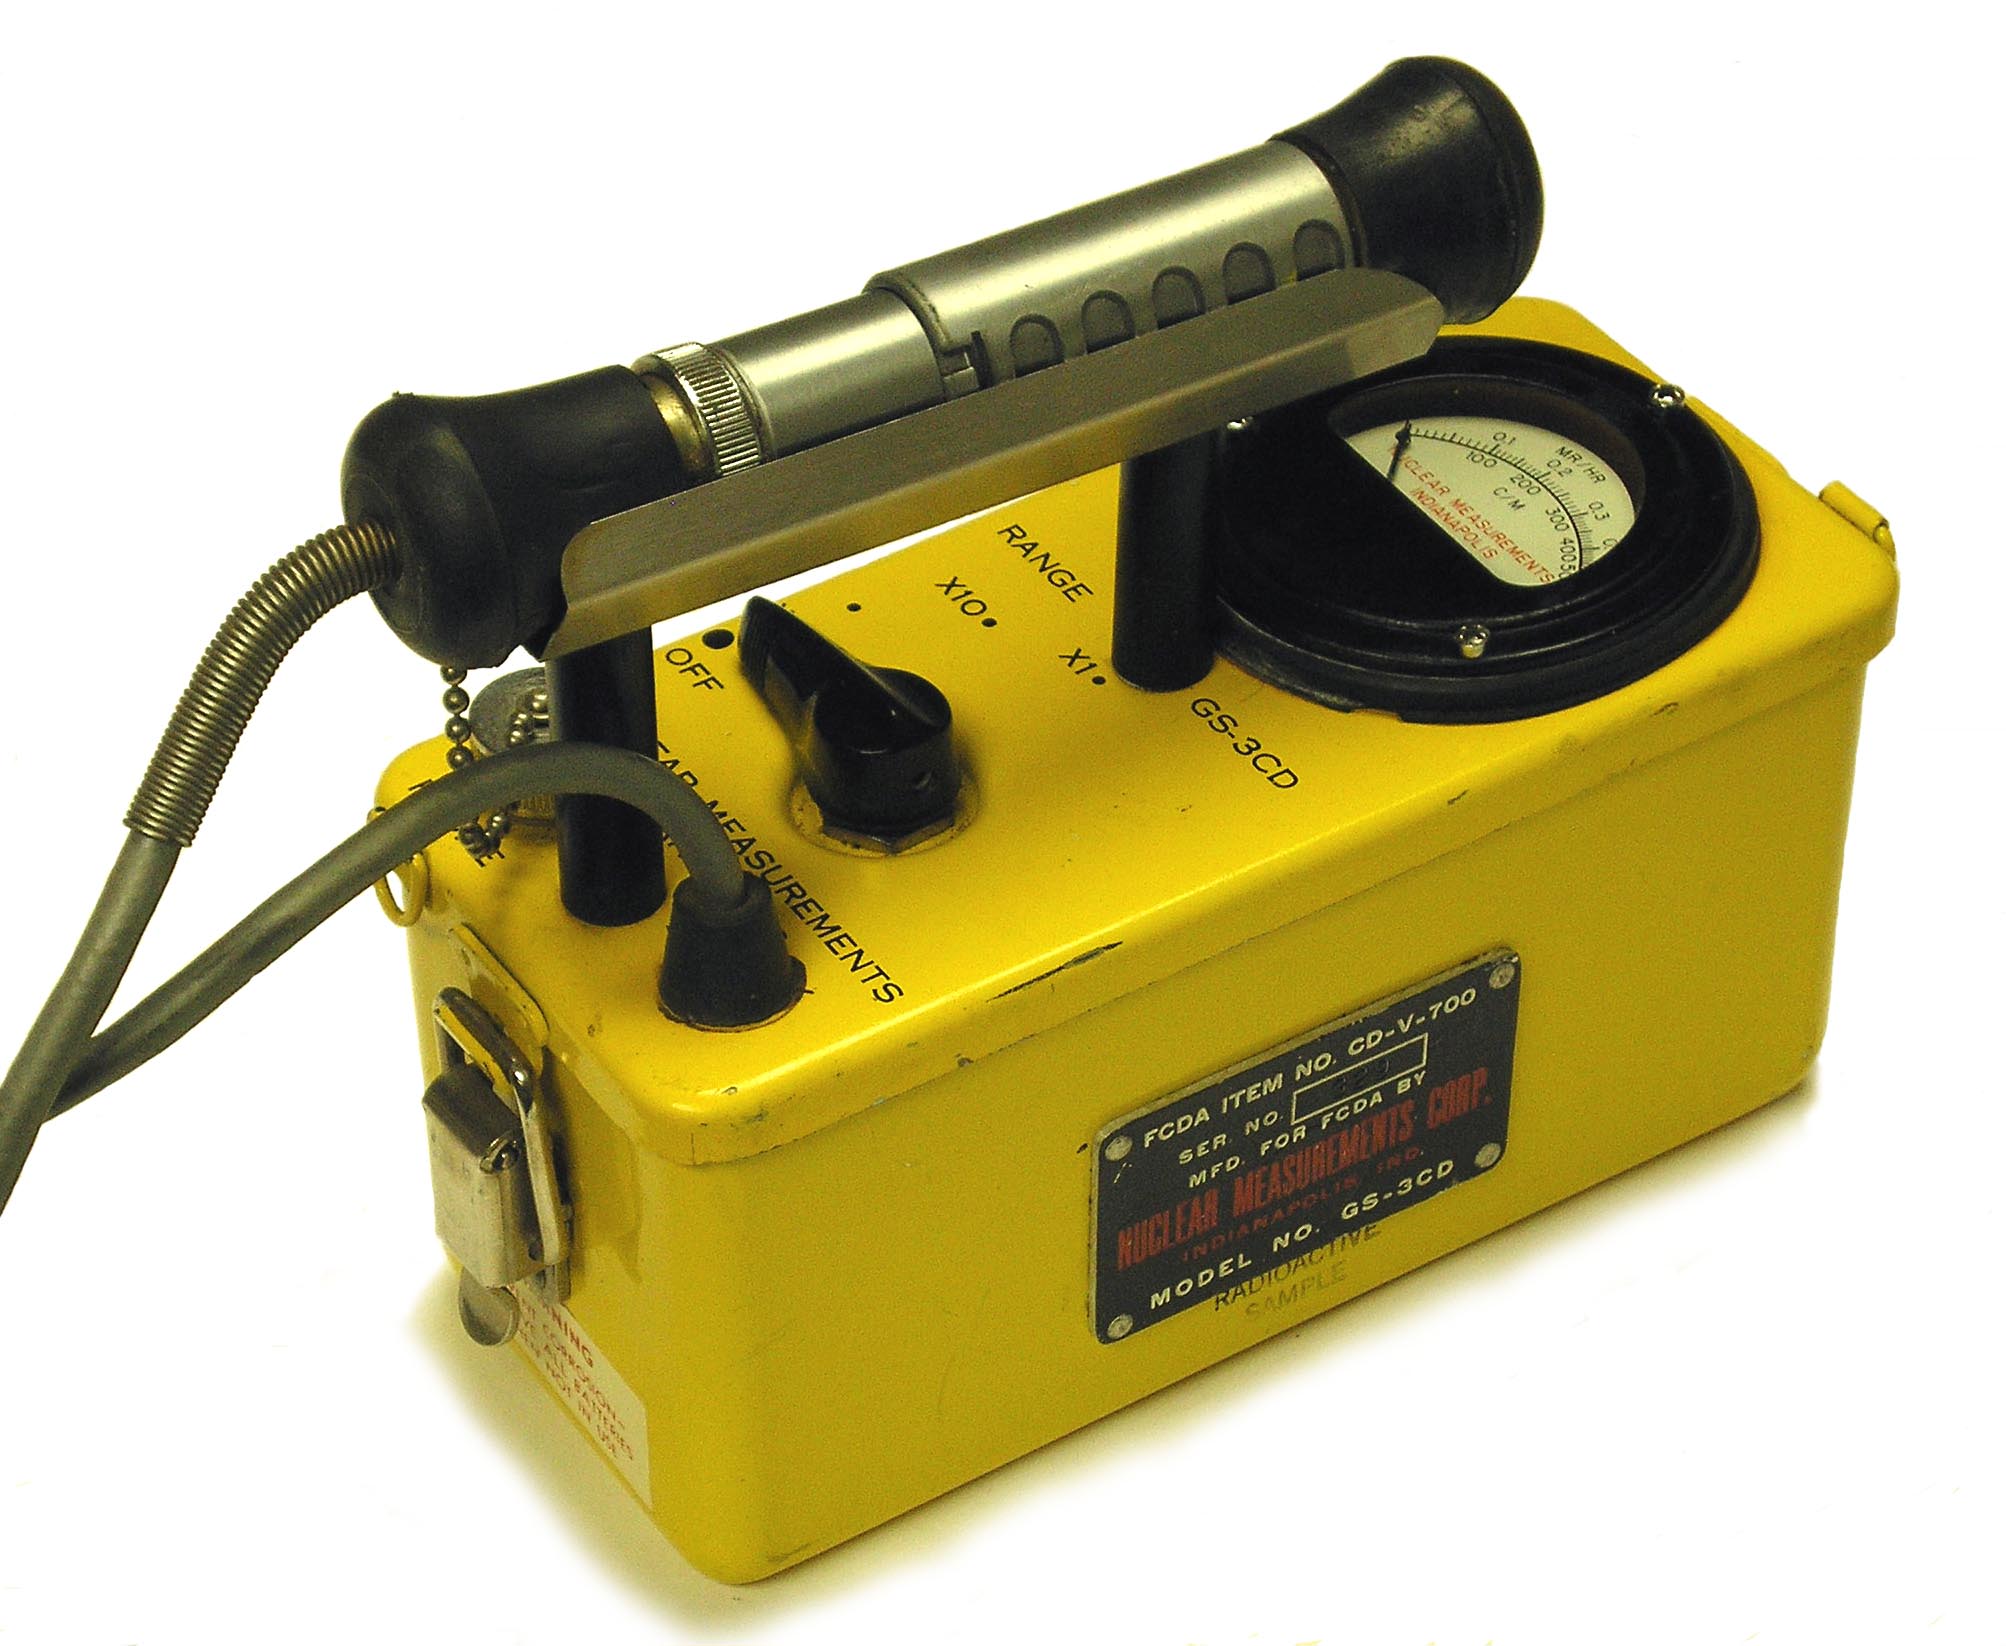 The Victoreen Instruments CO CDV-700 6B Radiation Detector/Geiger Counter 